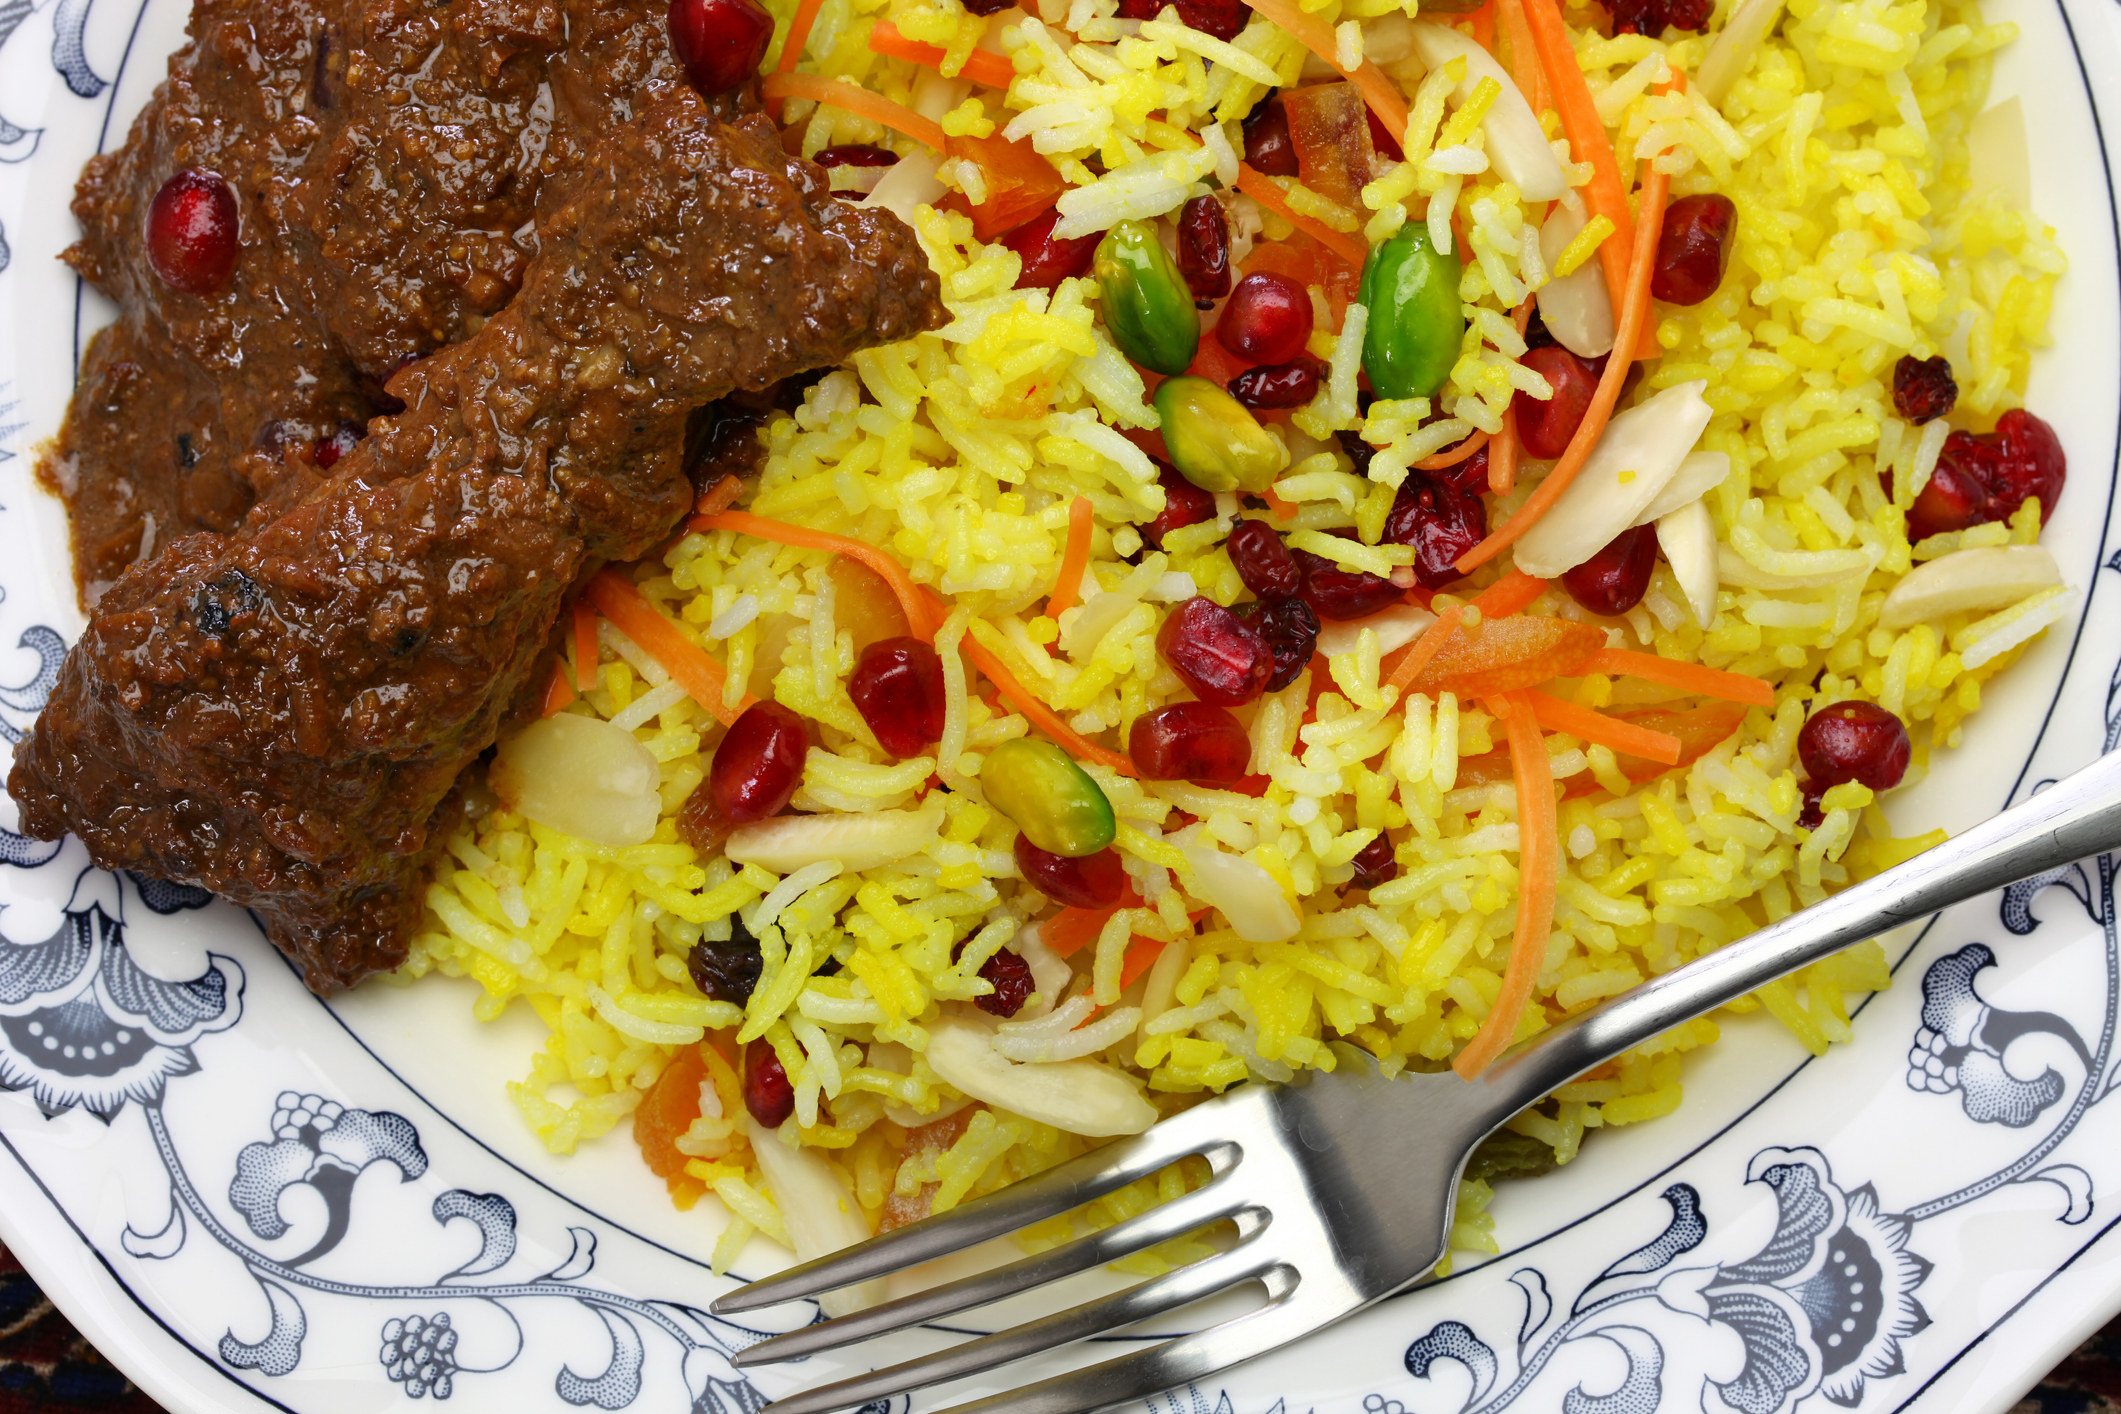 Persian jeweled rice and chicken fesenjan.